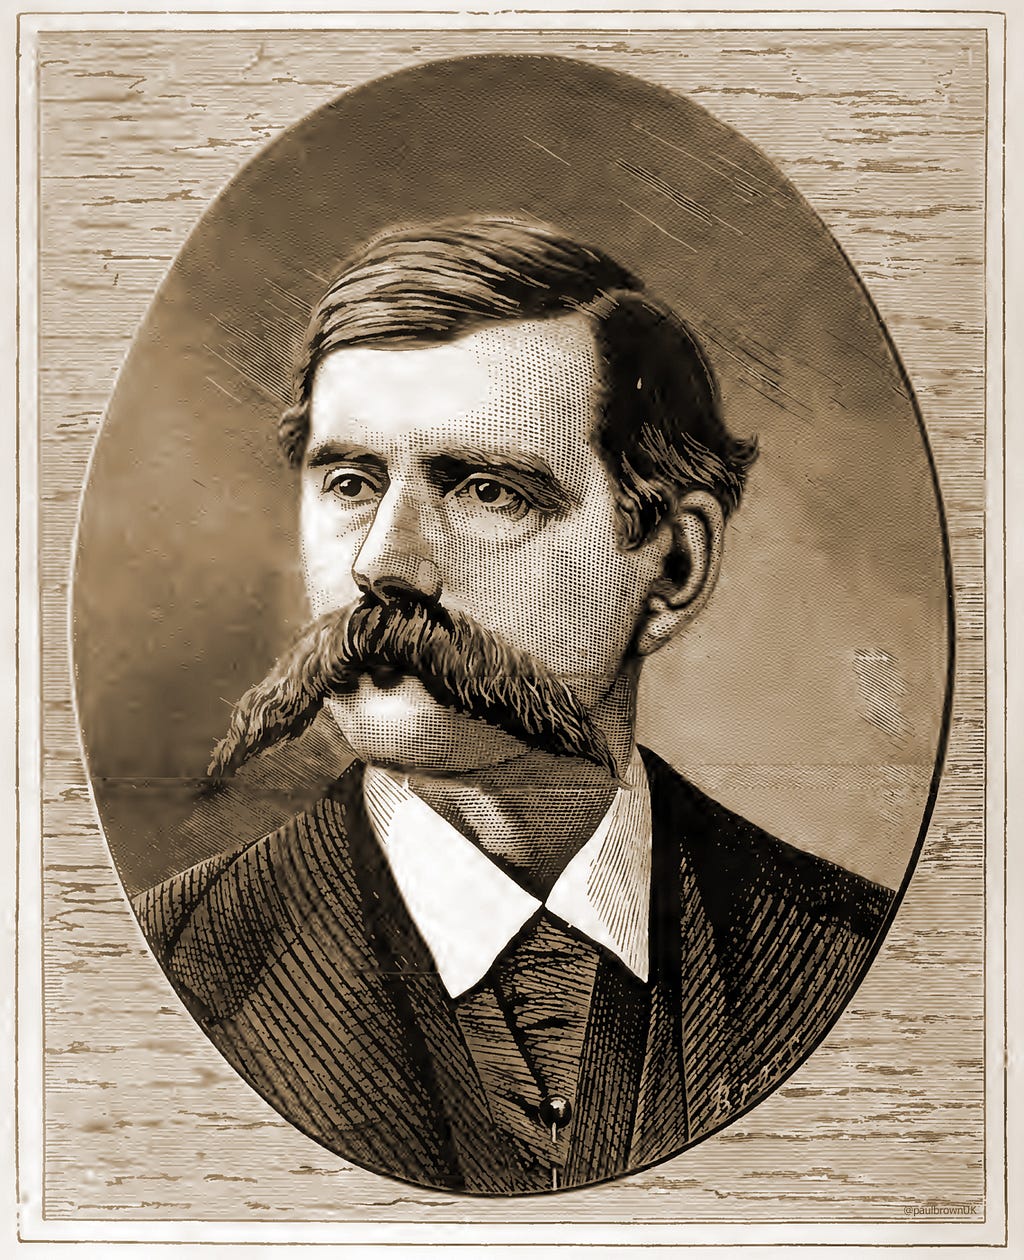 Arthur Pember and his remarkable mustache, adapted from Mysteries and Miseries, 1874